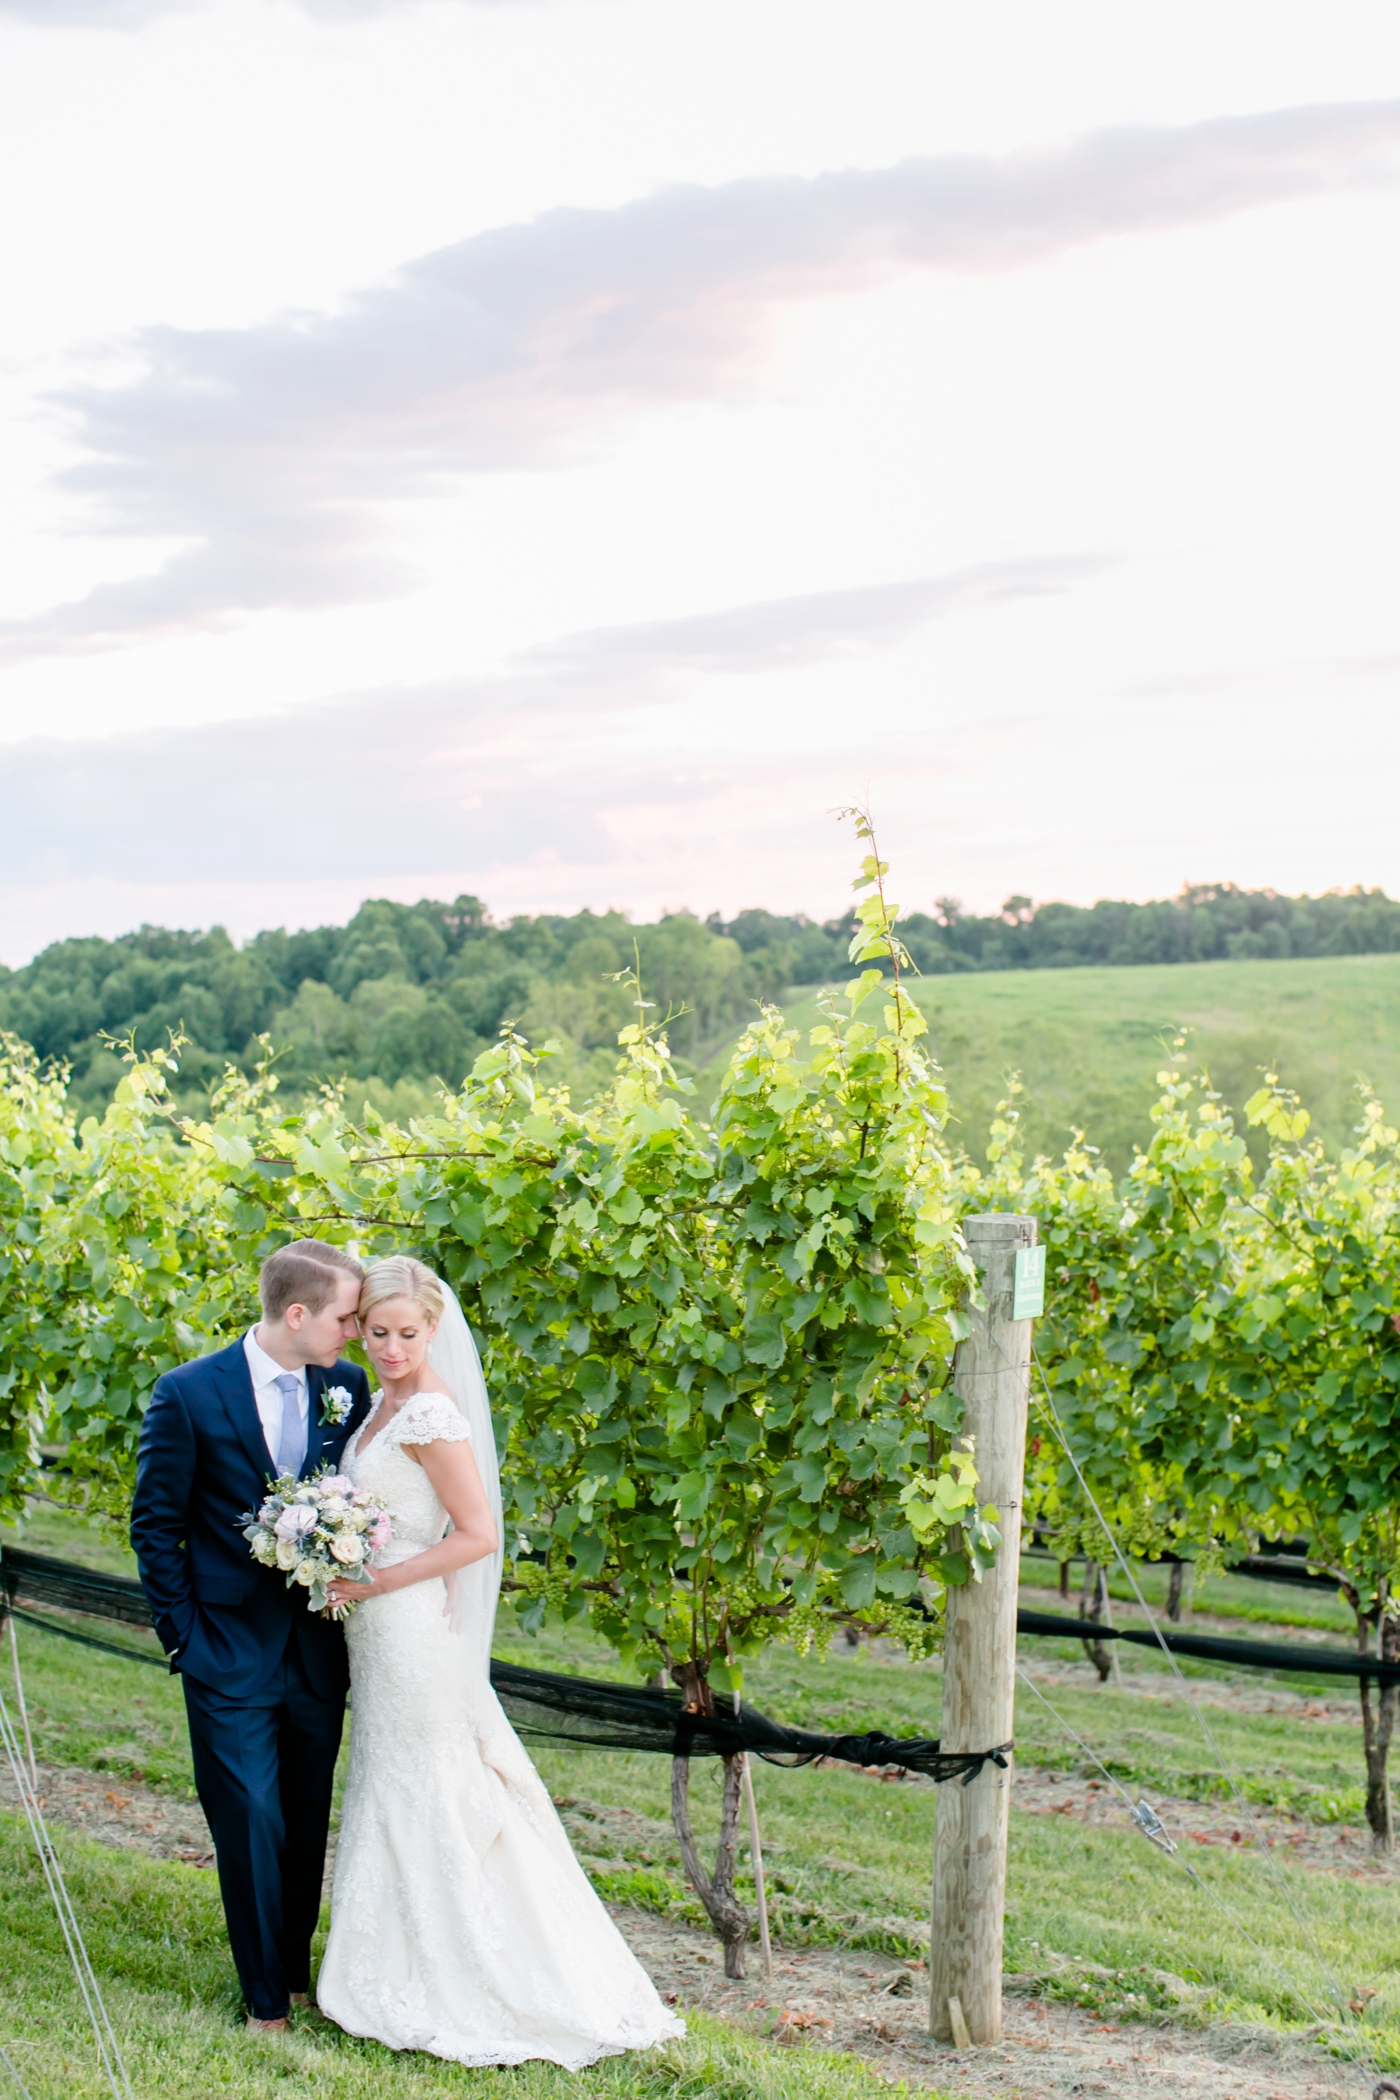 56A-Stone-Tower-Winery-Summer-Wedding-GG-1204